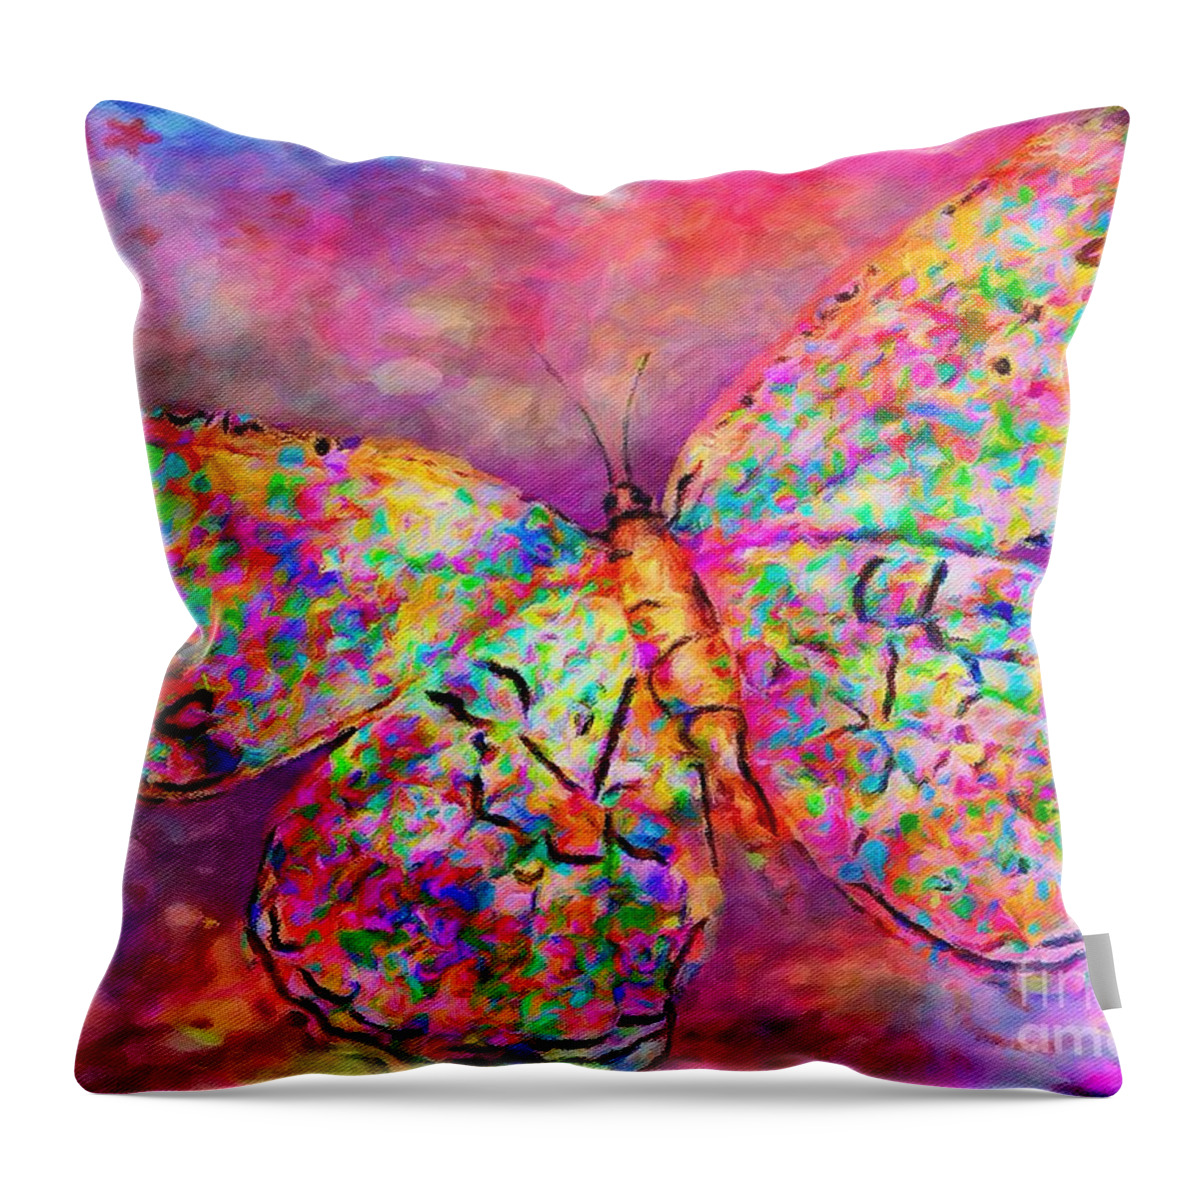 Ascending Butterfly Throw Pillow featuring the digital art Ascending Butterfly by Laurie's Intuitive